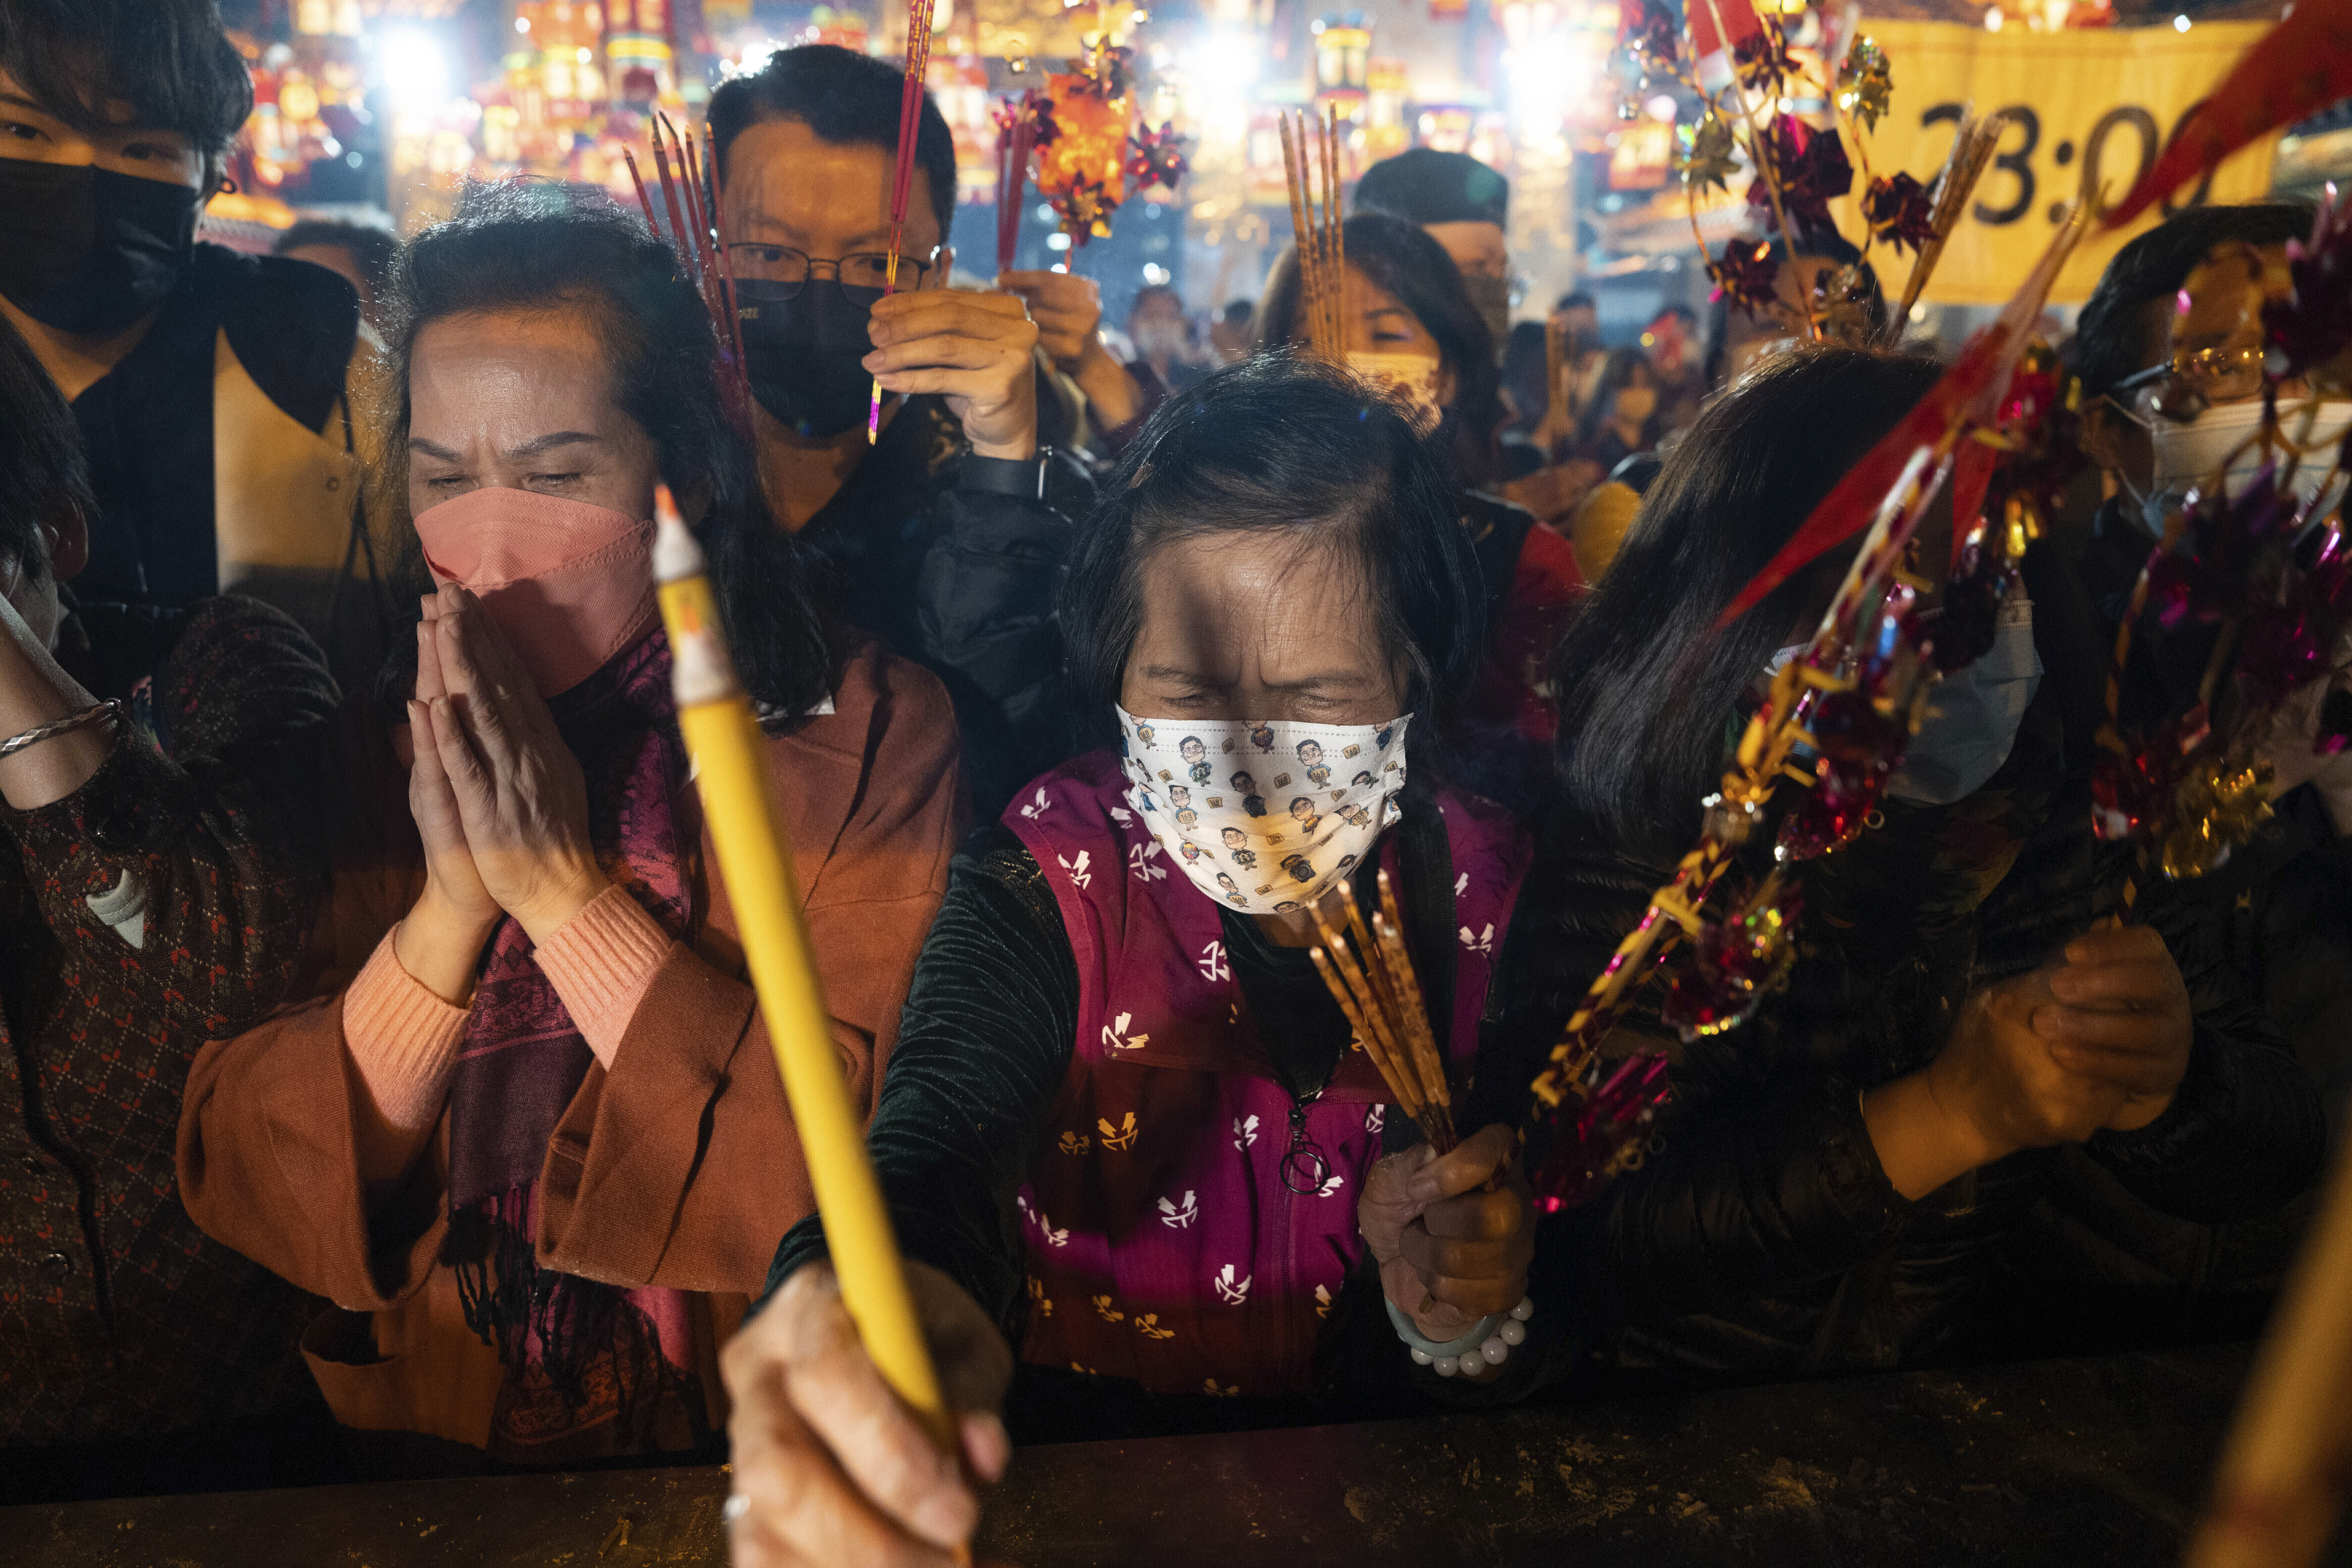 Worshipers wearing face masks burn their first incense sticks as they pray at Wong Tai Sin Temple in Hong Kong on Saturday, January 21, 2023, to celebrate the start of the Lunar New Year.  (AP Photo/Bertha Wang)